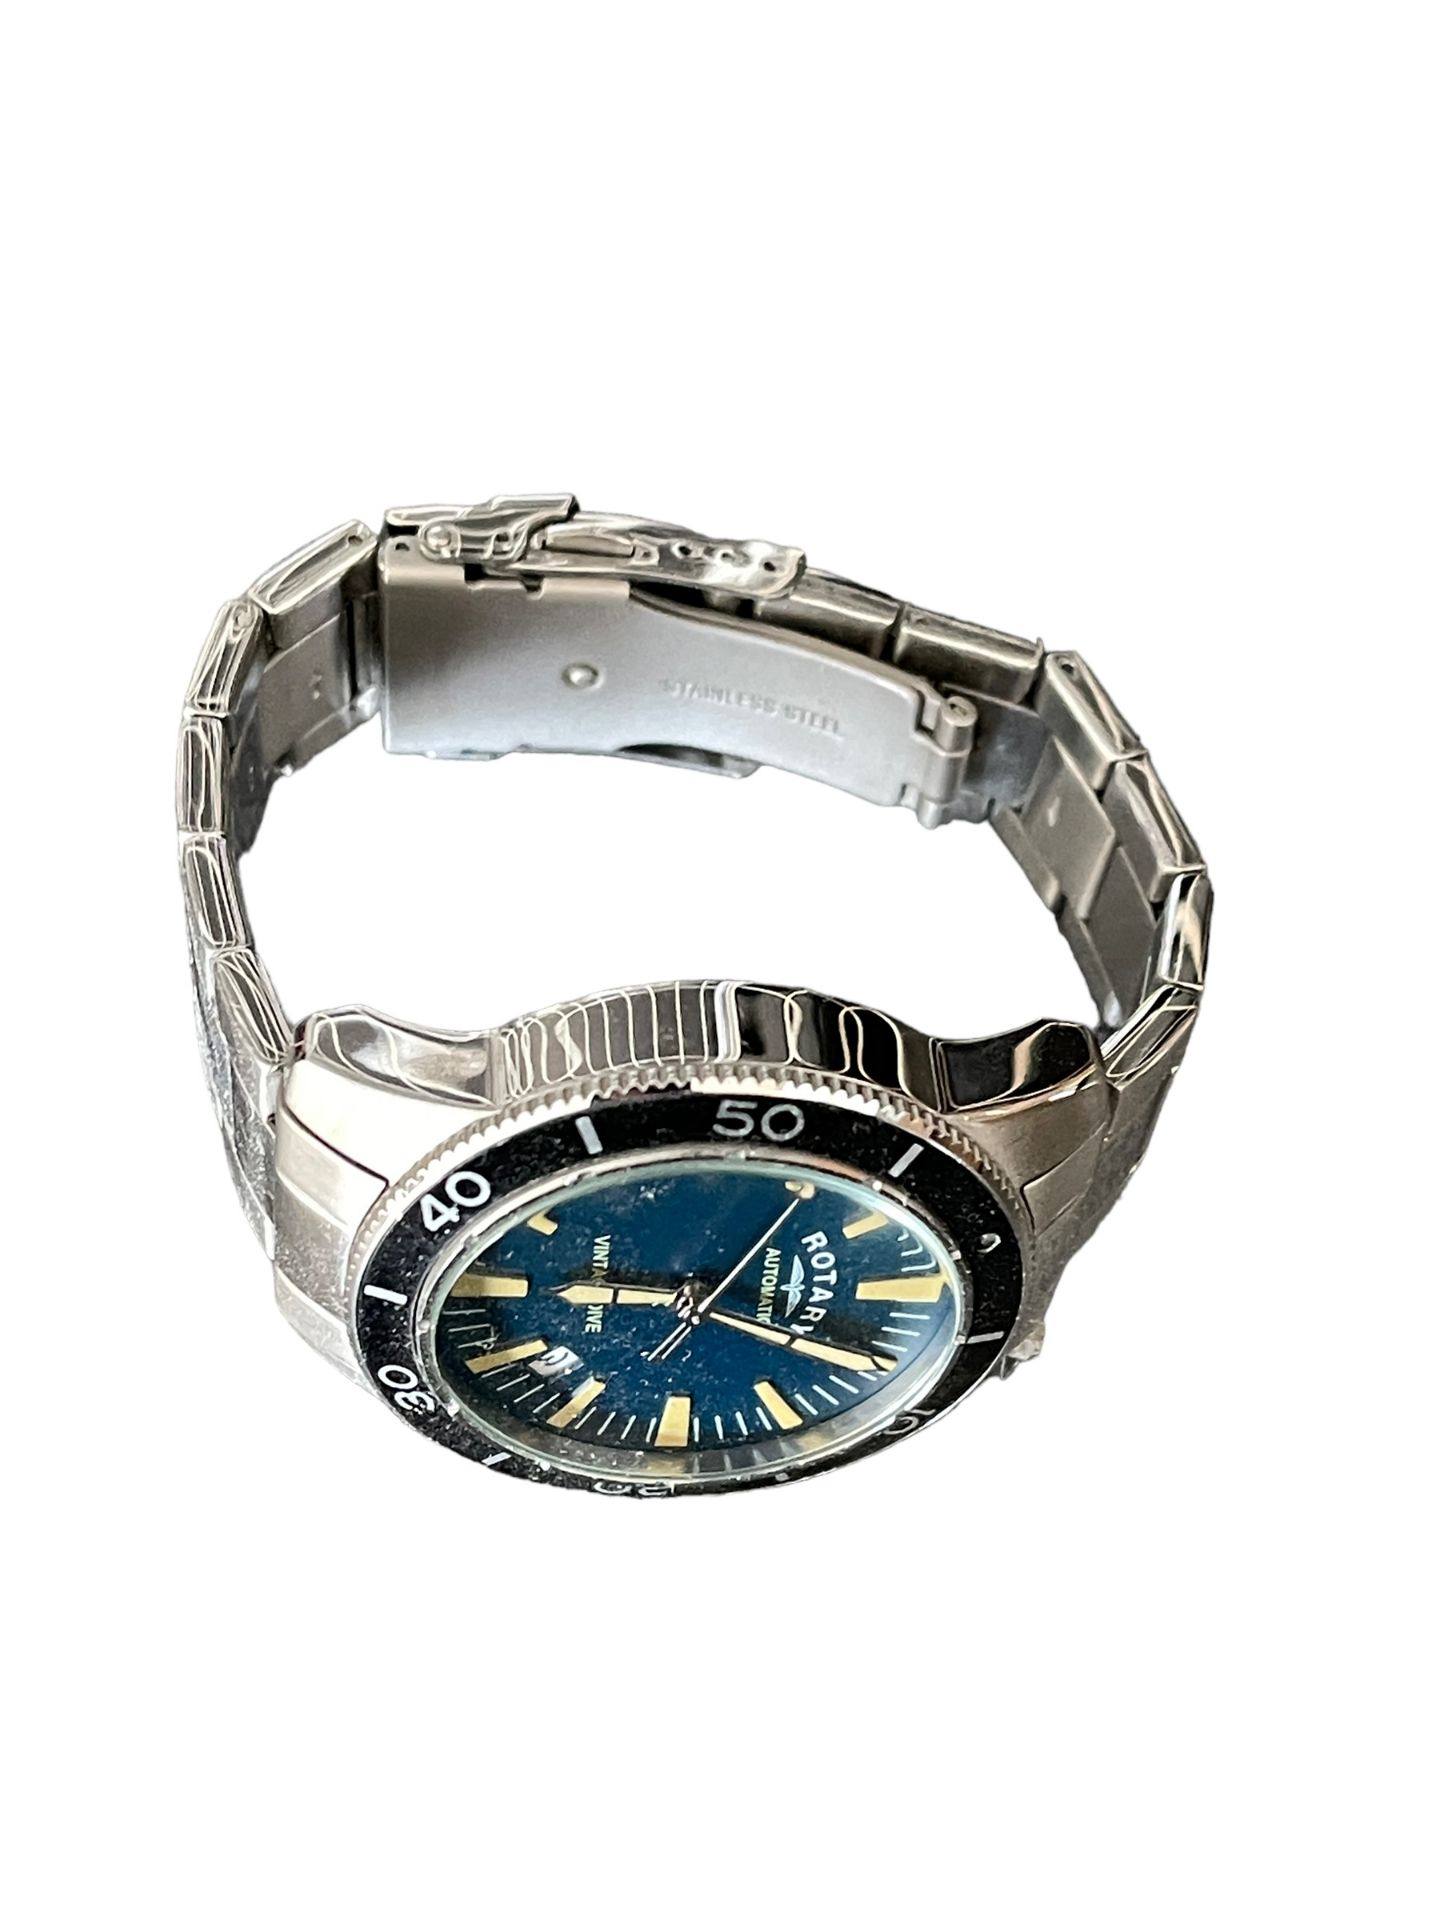 Rotary Divers Watch fully working with box paper bracelet stainless steel - Image 6 of 6